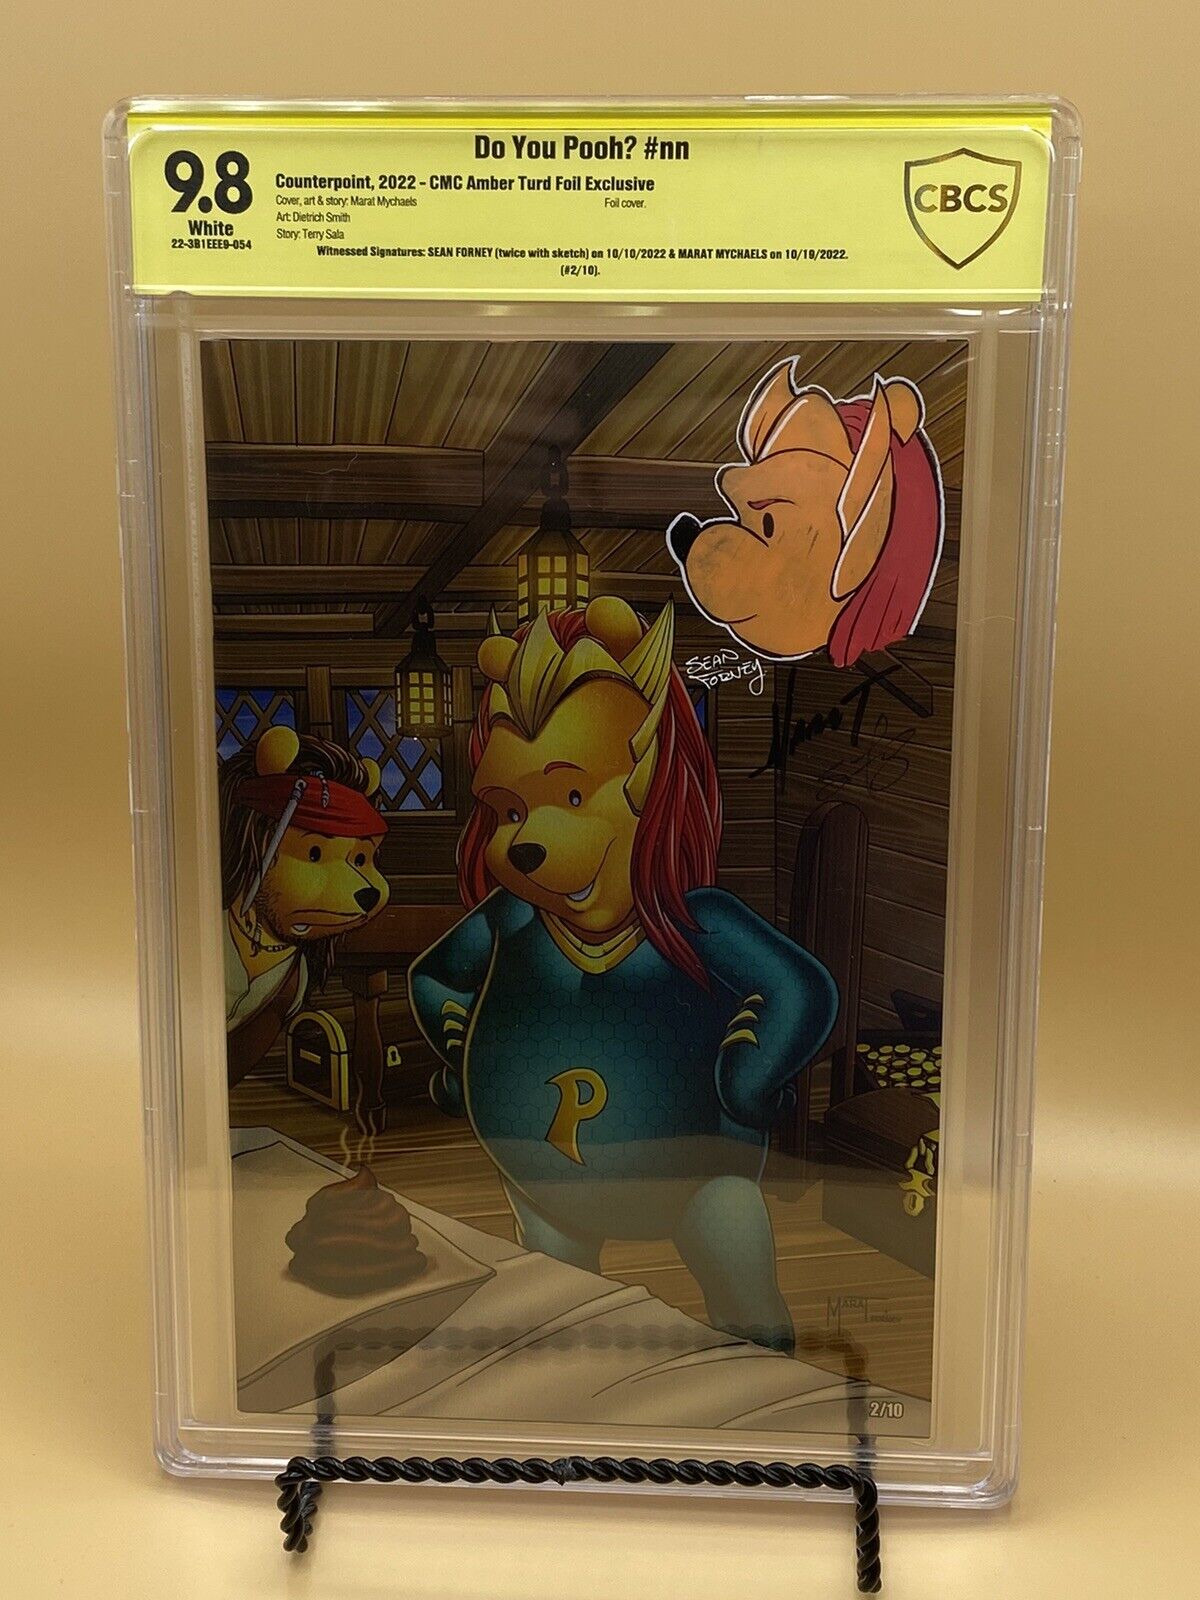 Do You Pooh Amber Turd Foil Cover 2/10 CBCS 9.8 3X signed Mychaels Forney